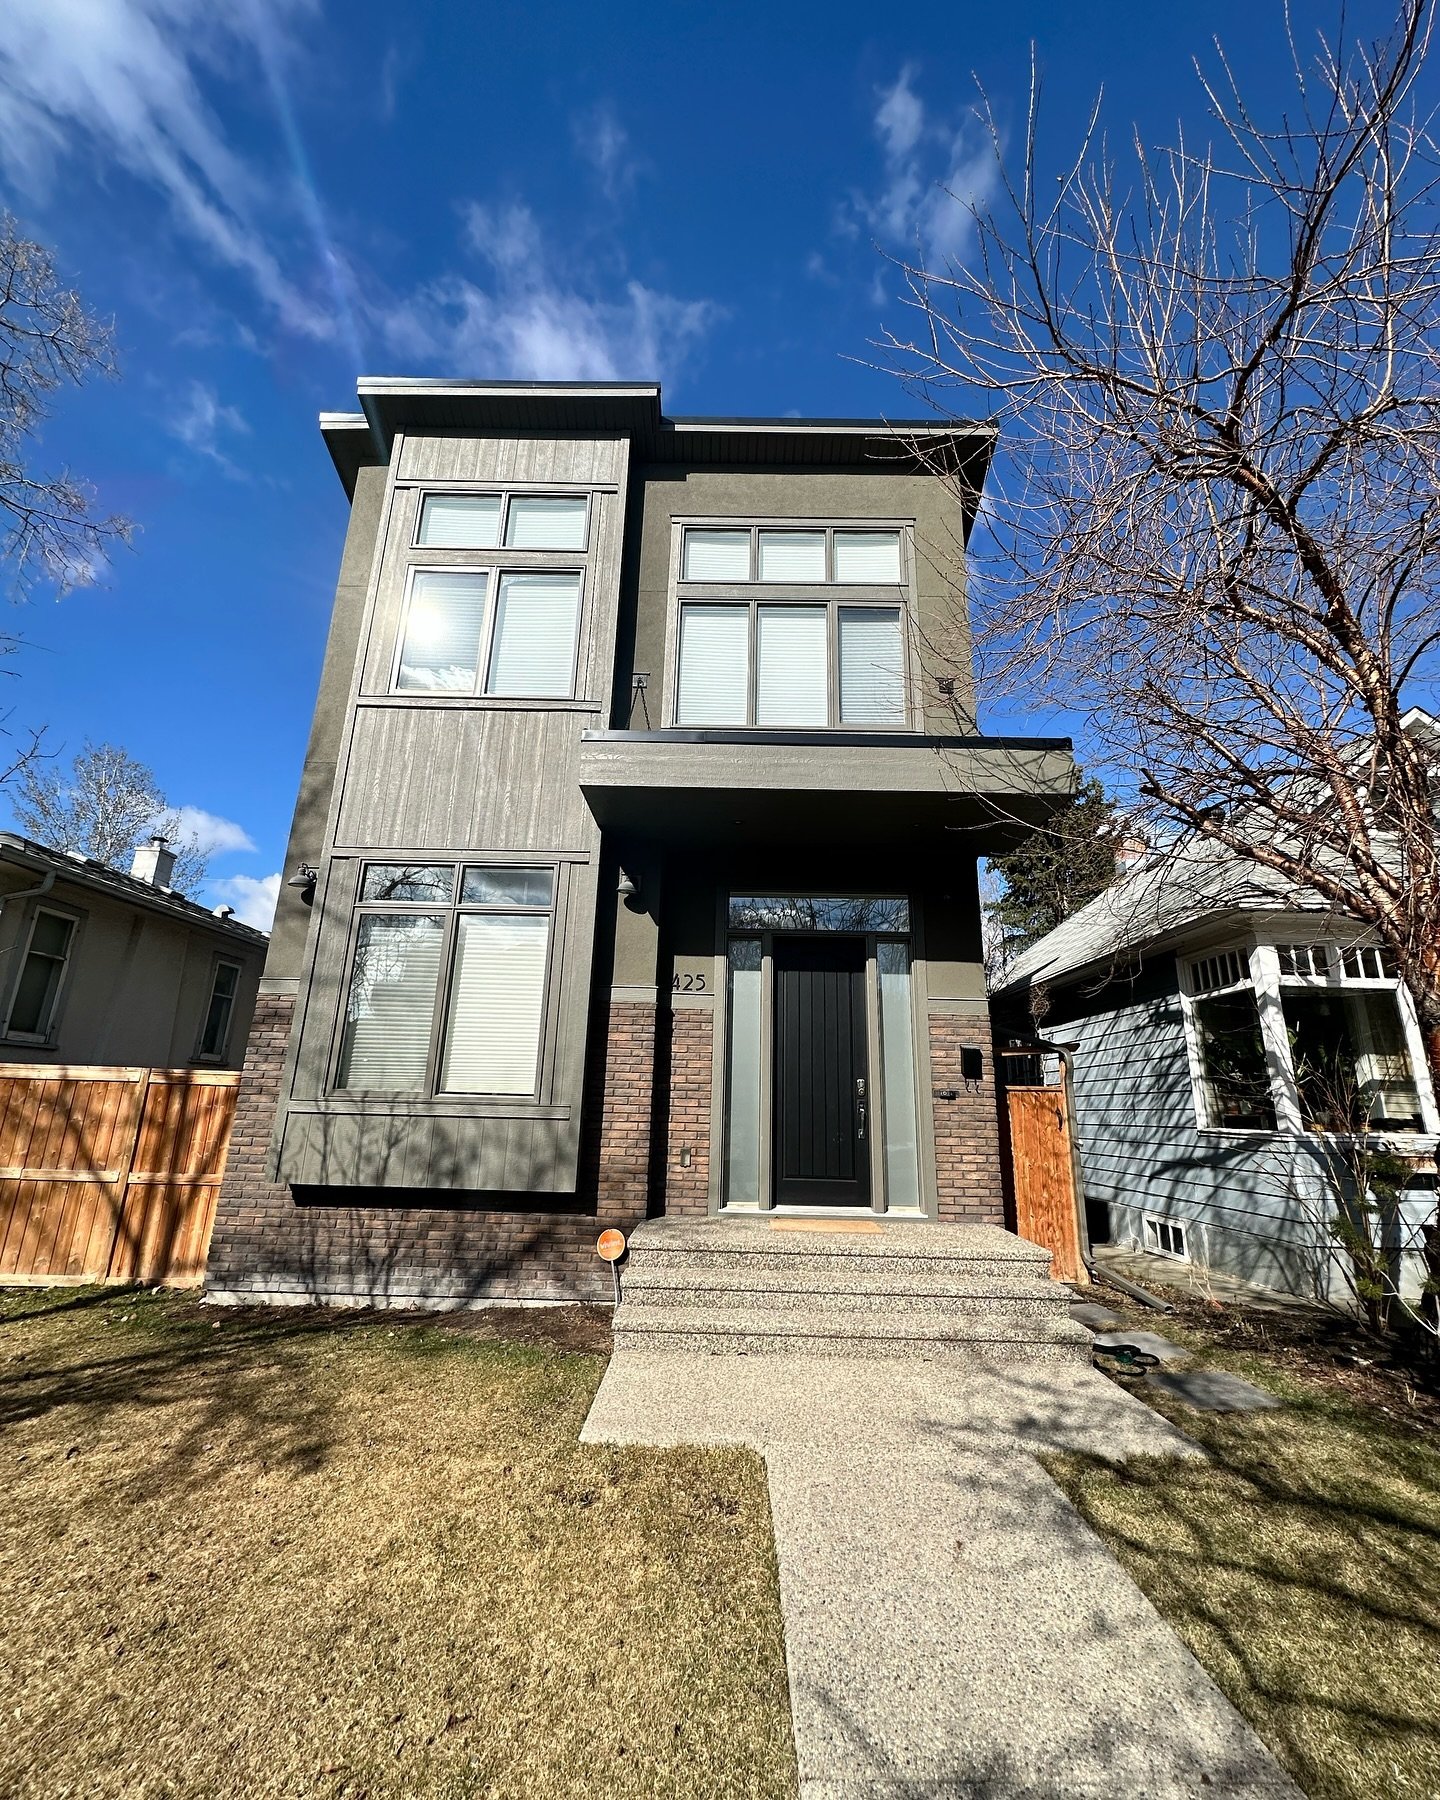 Such a beautiful home in a great location. Close to coffee shops, patio, the zoo!

Great staging consultation to prepare this house for sale on 11 Street NE.

Light, bright, large size bedrooms and freshly painted! Ready to move in

Offered all my st